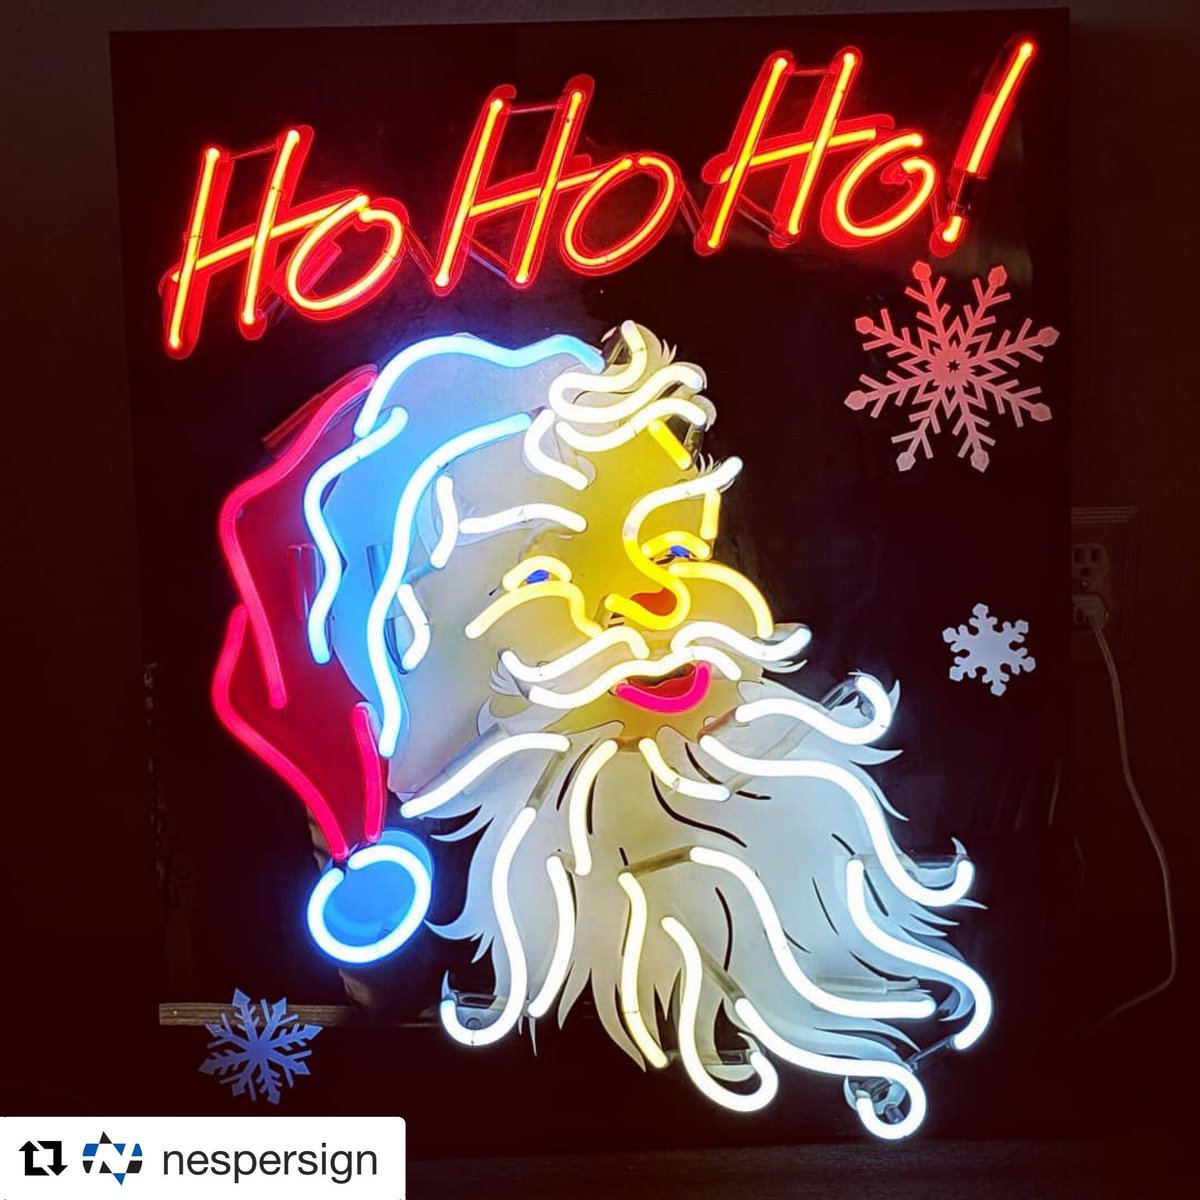 Talk about being merry and bright! 🎅
This HO HO HO-liday neon is awesome @NesperSign! 

#NeonSign #NeonSignage #NeonBending #NeonGlow